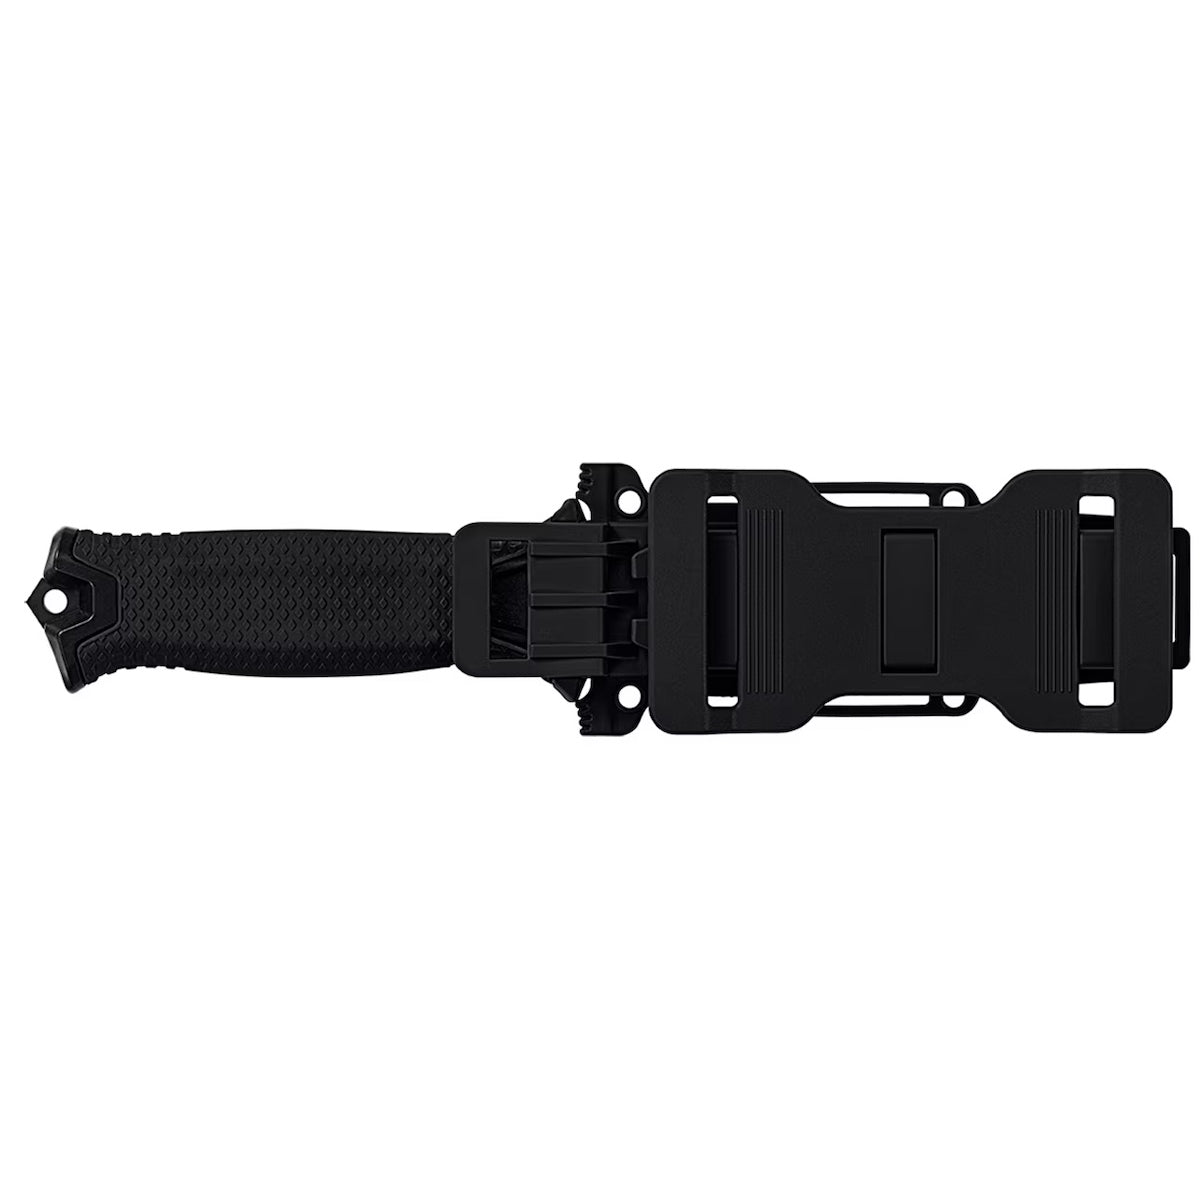 Gerber Strongarm Fixed Blade Knife